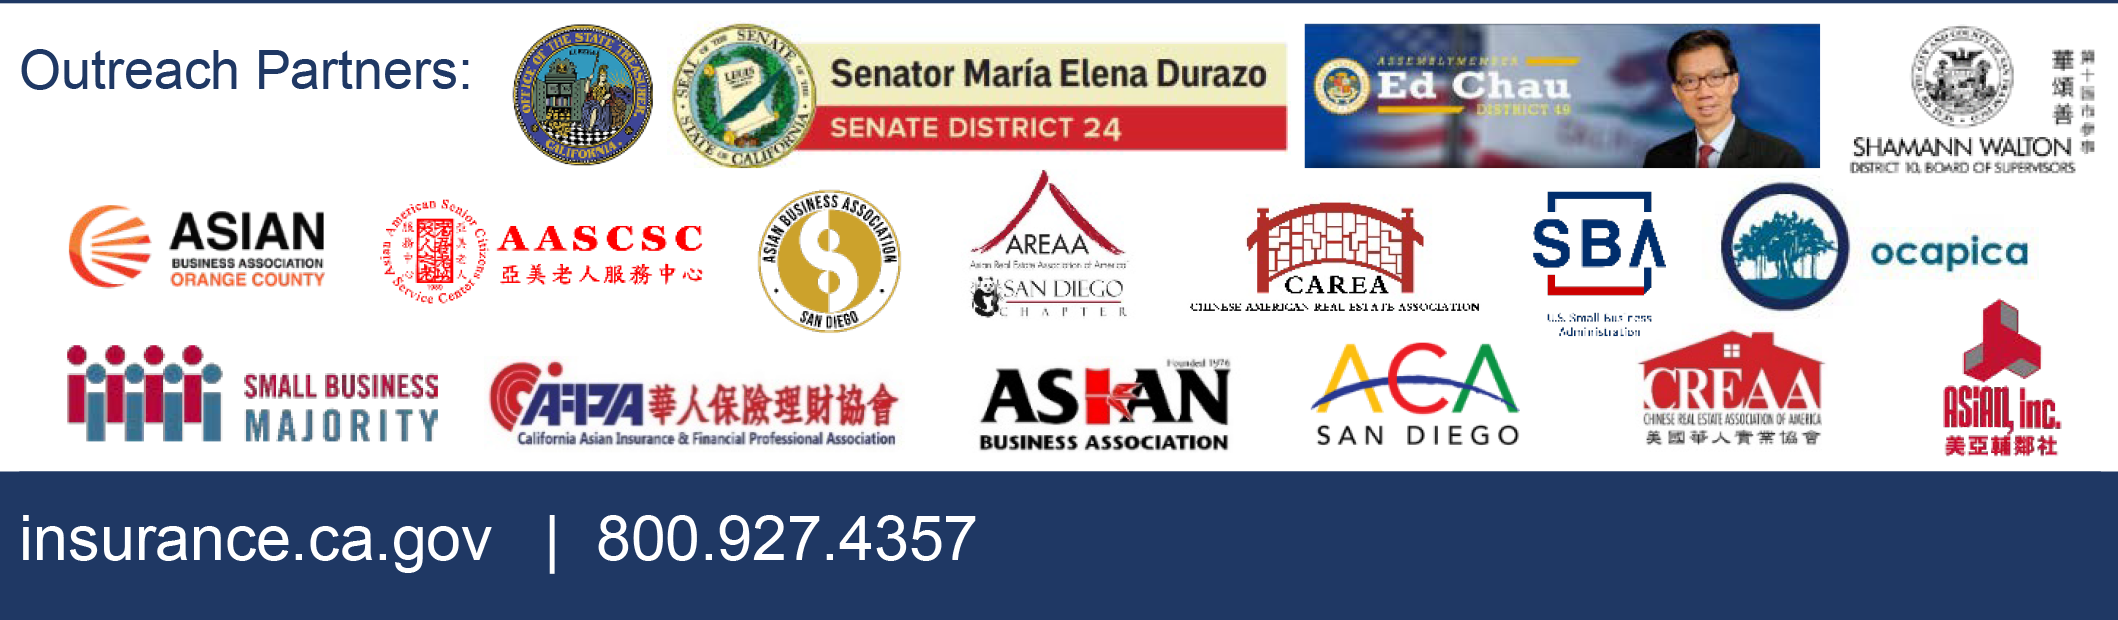 Outreach partners: Assemblymember Ed Chau, Asian Business Association Orange County, Asian American Citizen Center, Small Business Majority, California Asian Insurance and Financial professional  Association, Asian Business Association, AREAA, ABA SD